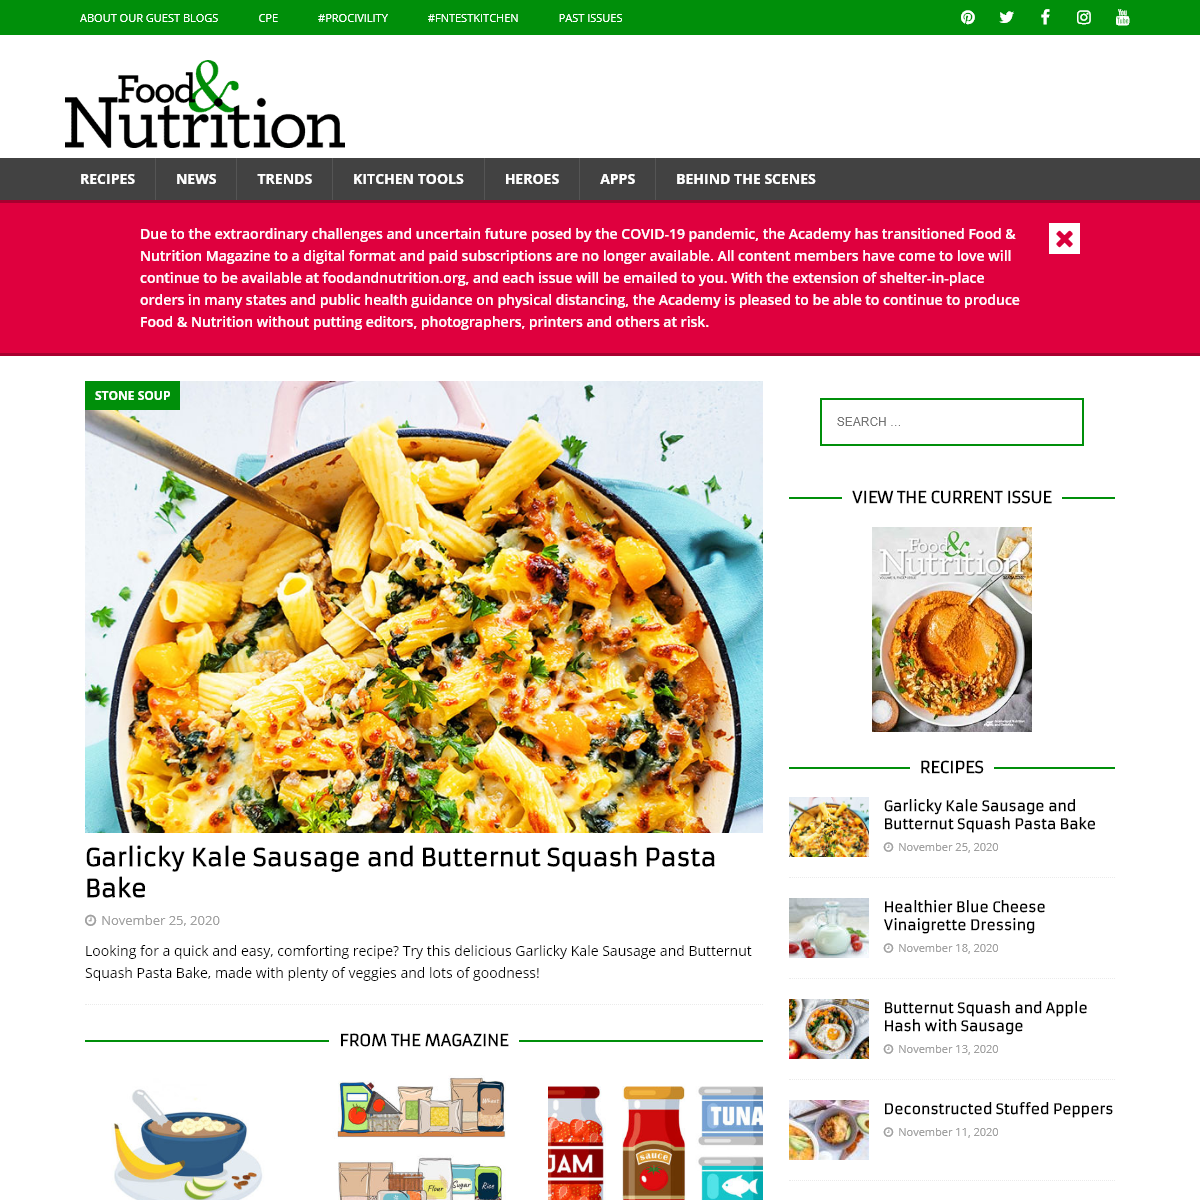 A complete backup of foodandnutrition.org